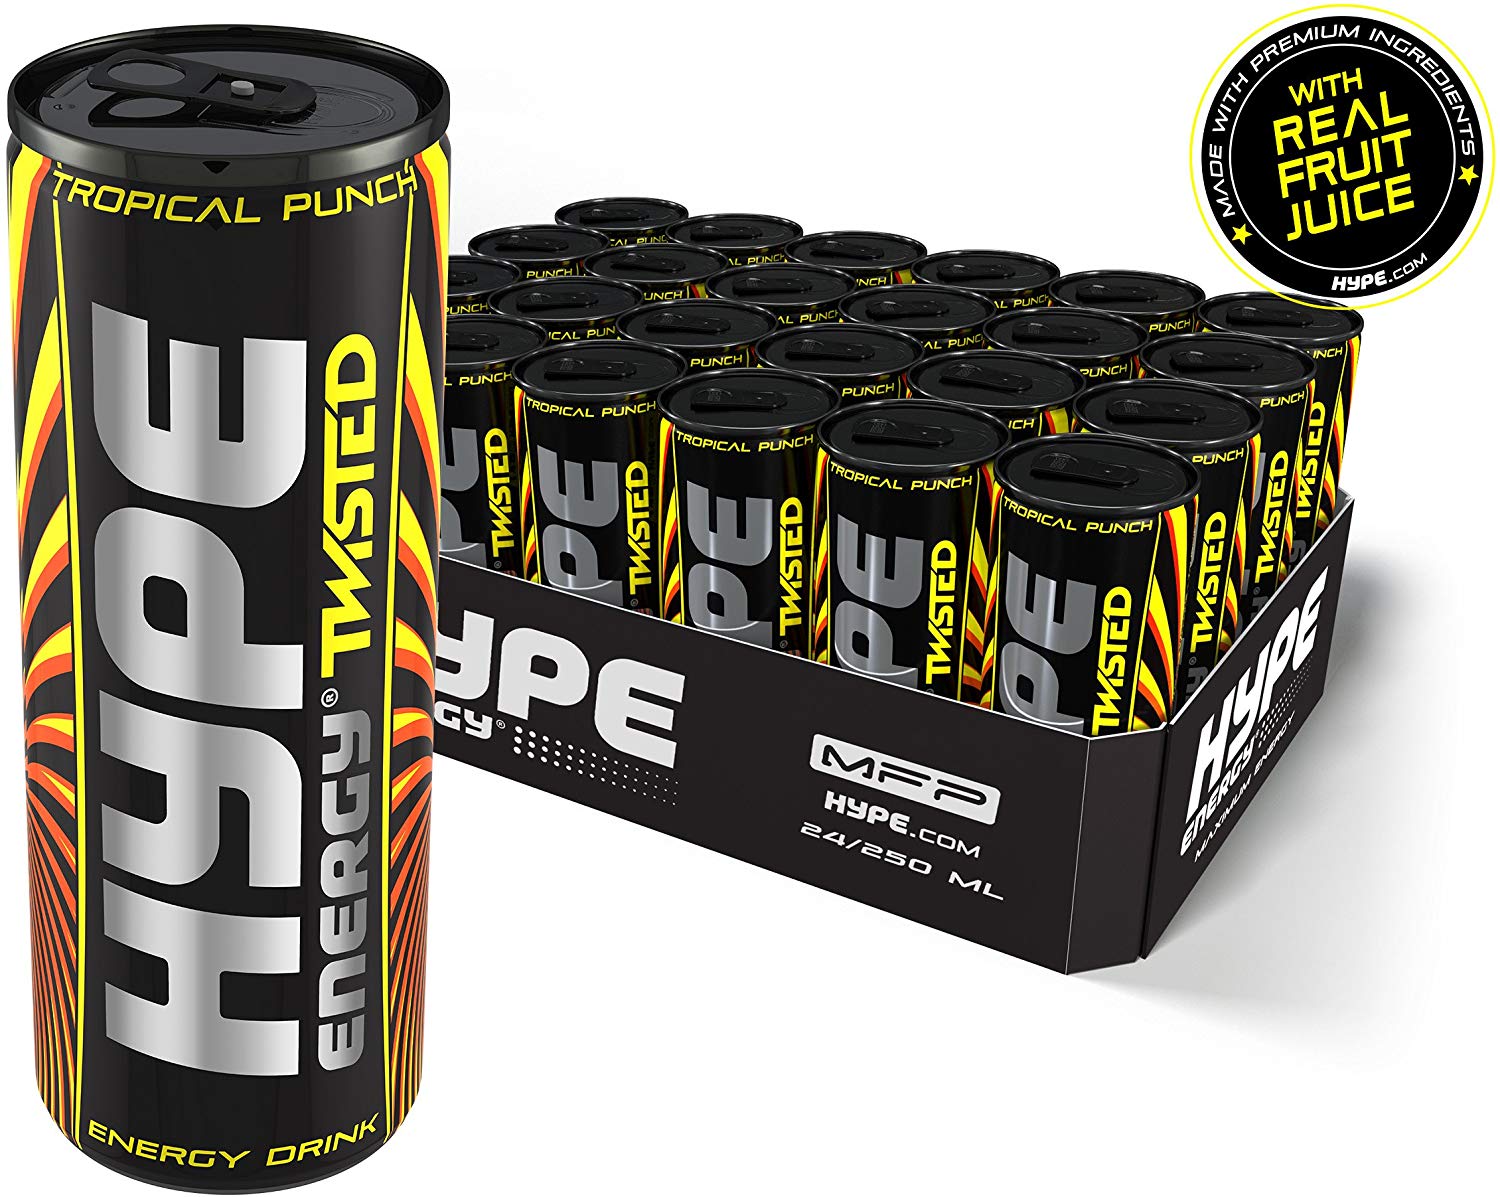 HYPE-TWISTED - TROPICAL PUNCH 1 ×24 (250ml each)